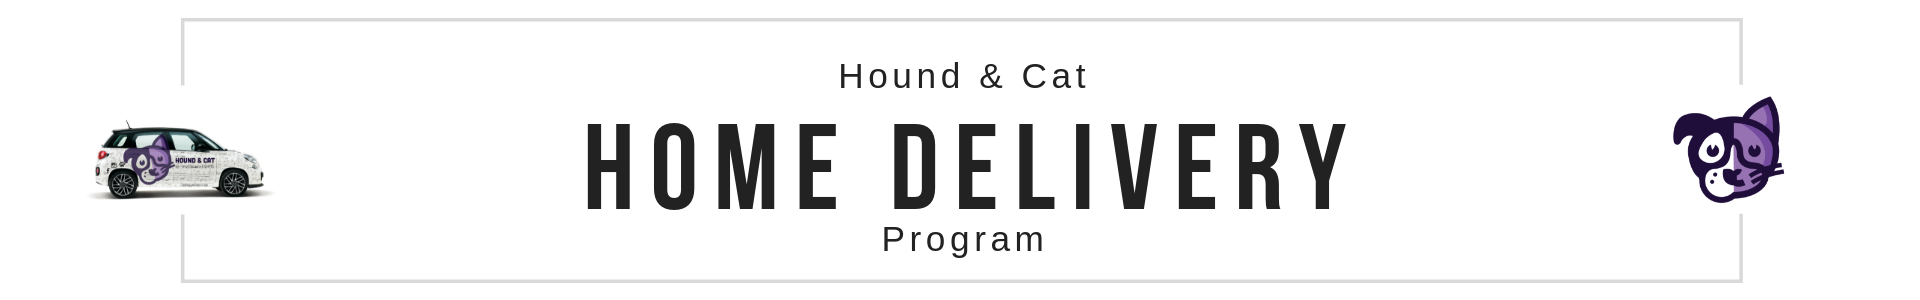 Hound & Cat Home Delivery Program